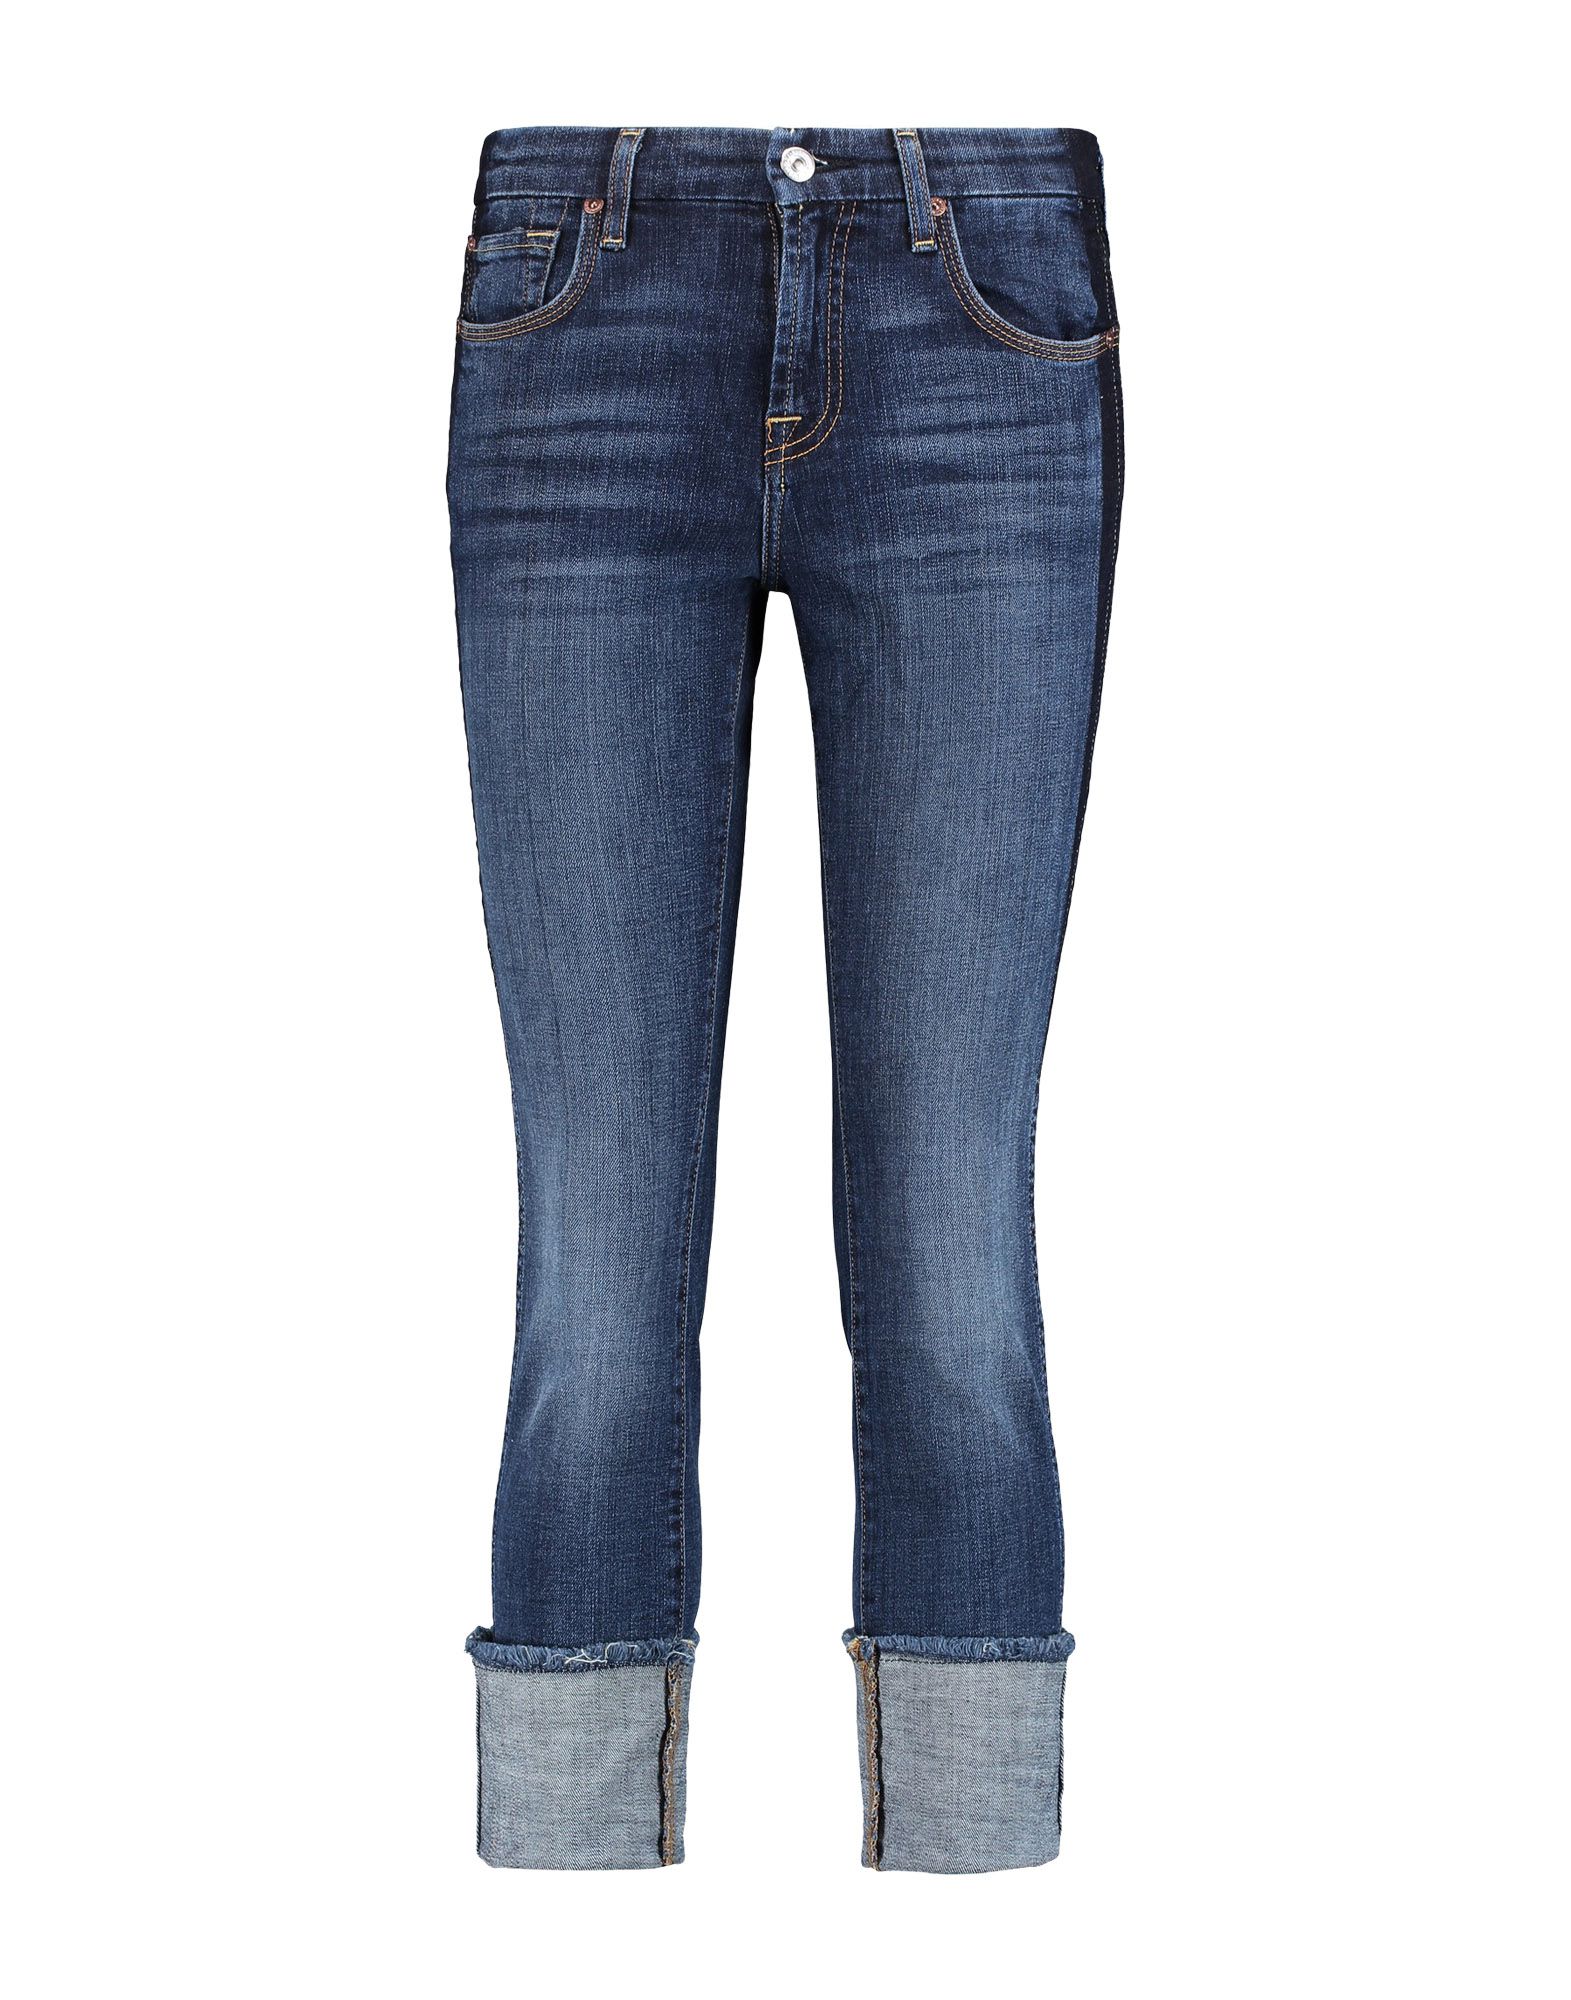 7 FOR ALL MANKIND Denim trousers,42684068MF 1